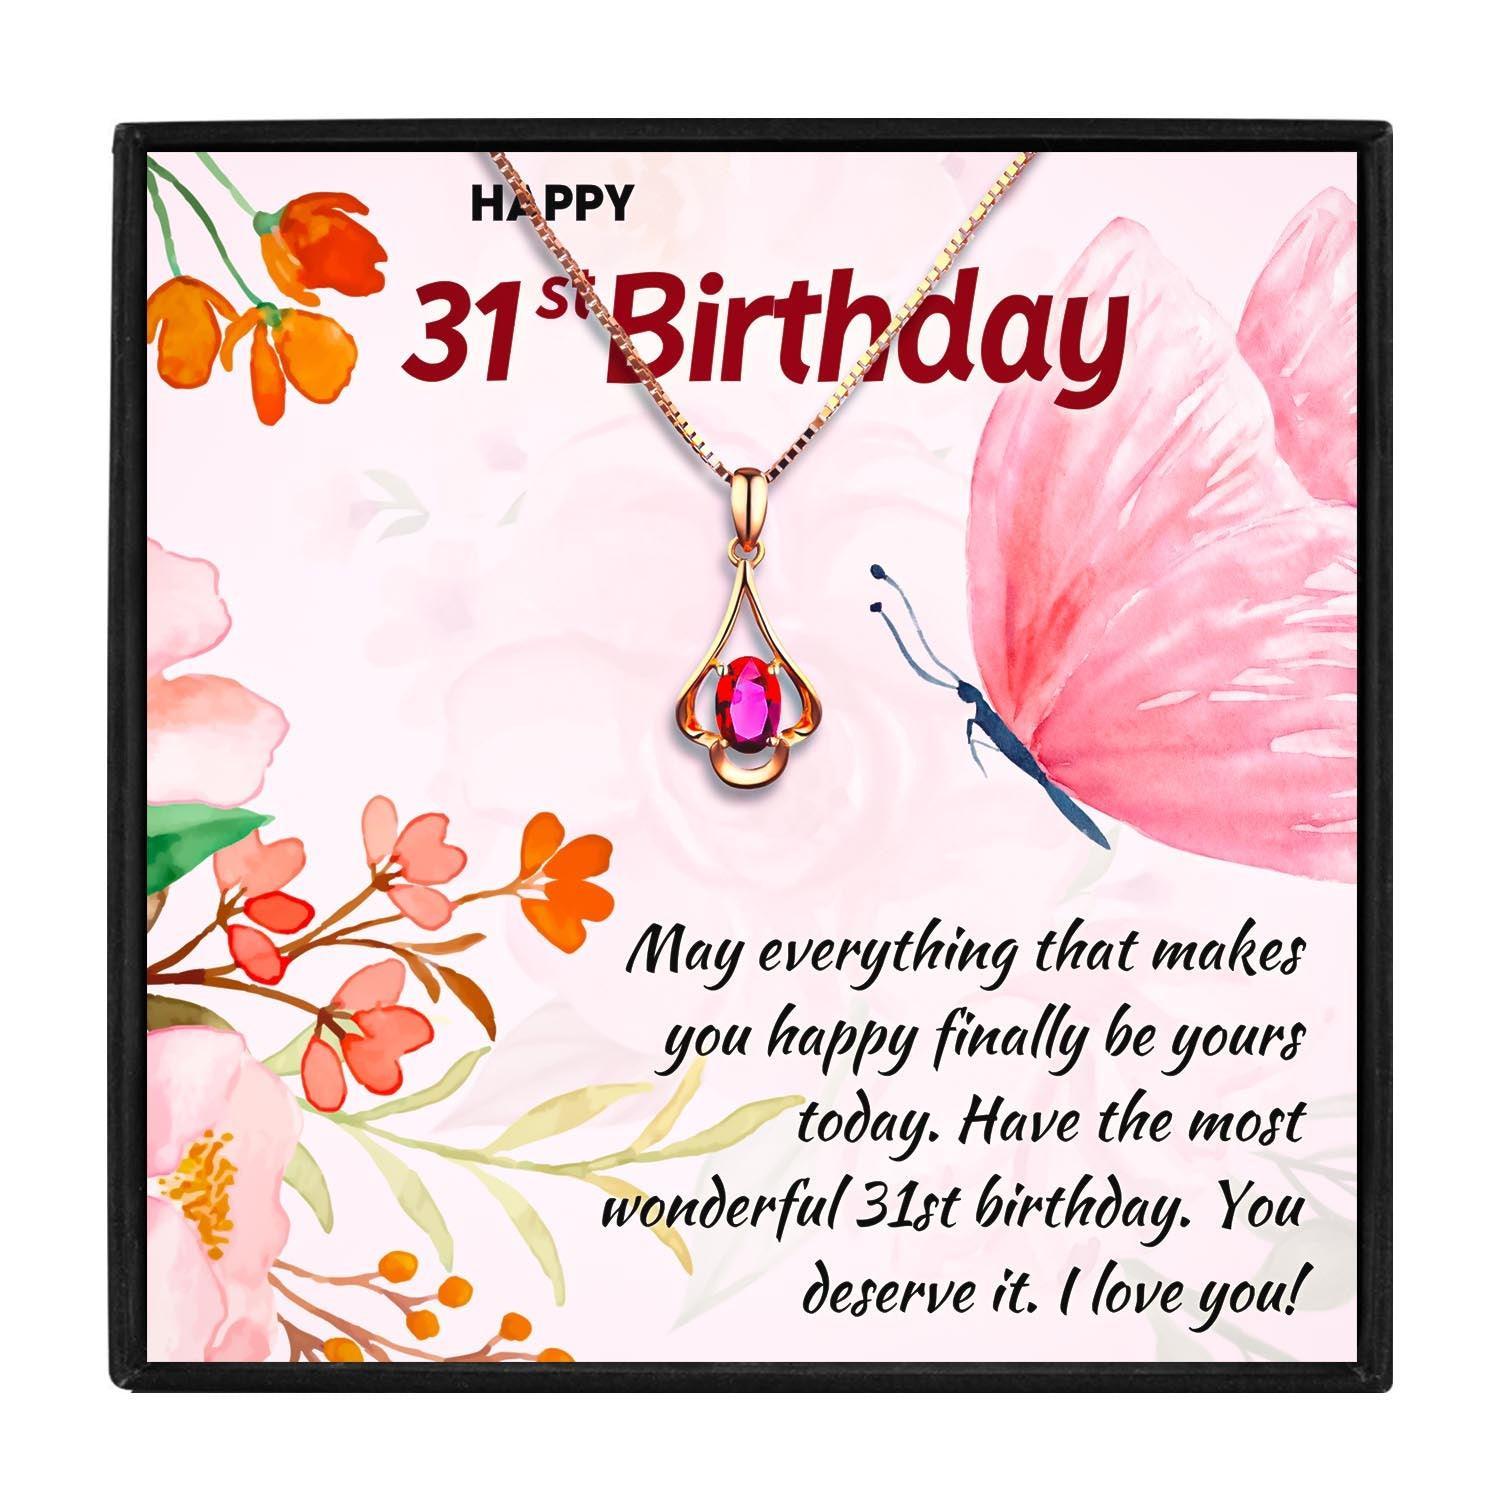 31st Birthday Gifts for 31 Year Old Women in 2023 | 31st Birthday Gifts for 31 Year Old Women - undefined | 31 birthday gift, 31 gifts for 31st birthday, 31st birthday ideas for her, 31st birthday ideas for wife | From Hunny Life | hunnylife.com